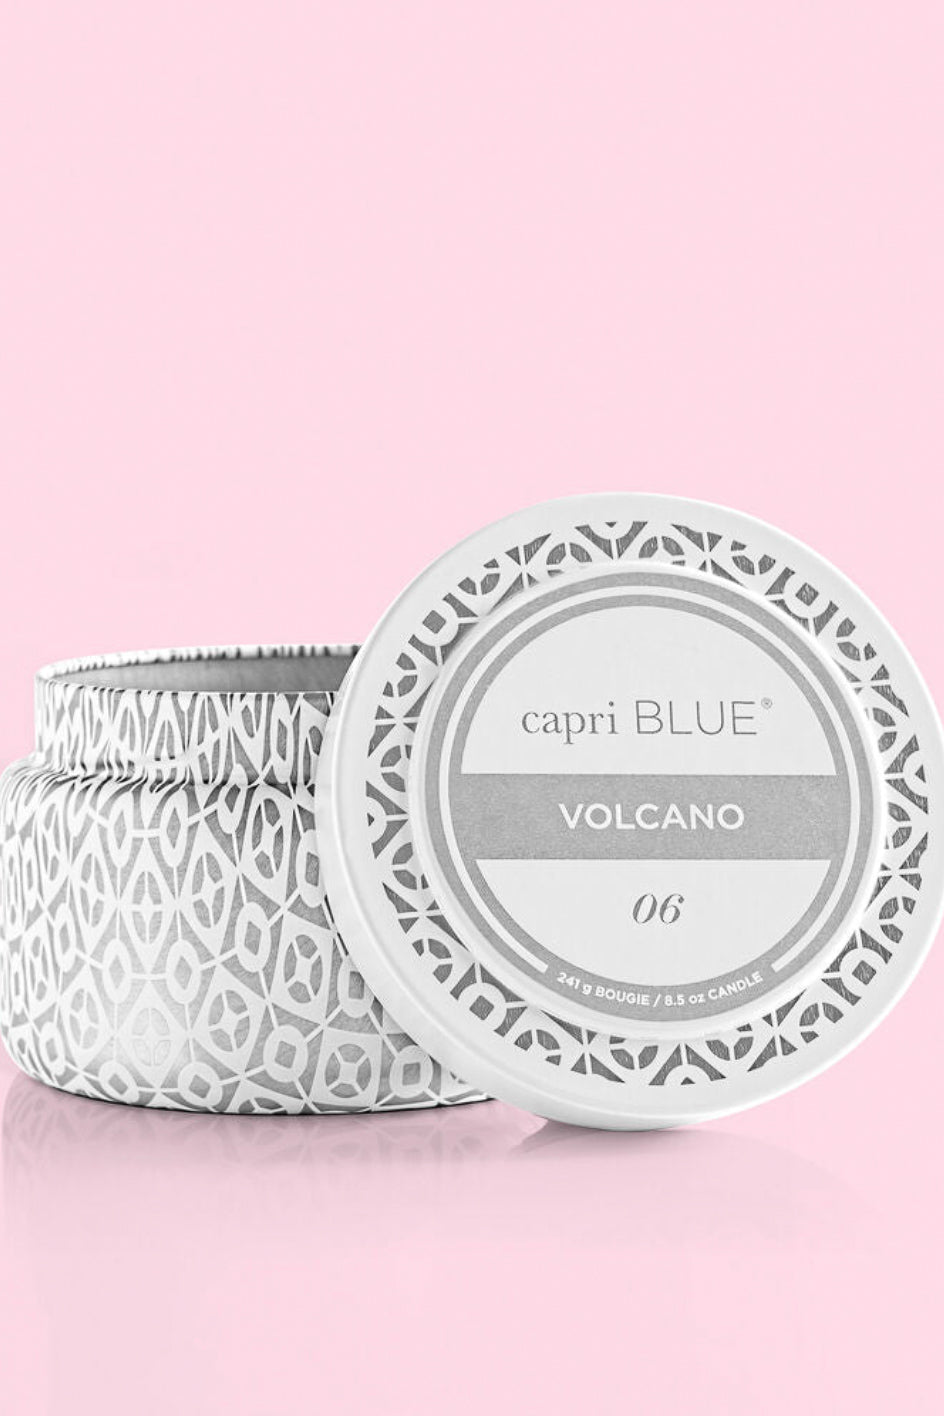 Capri Blue Volcano Signature Printed Travel Tin Candle (STORE PICK UP ONLY)